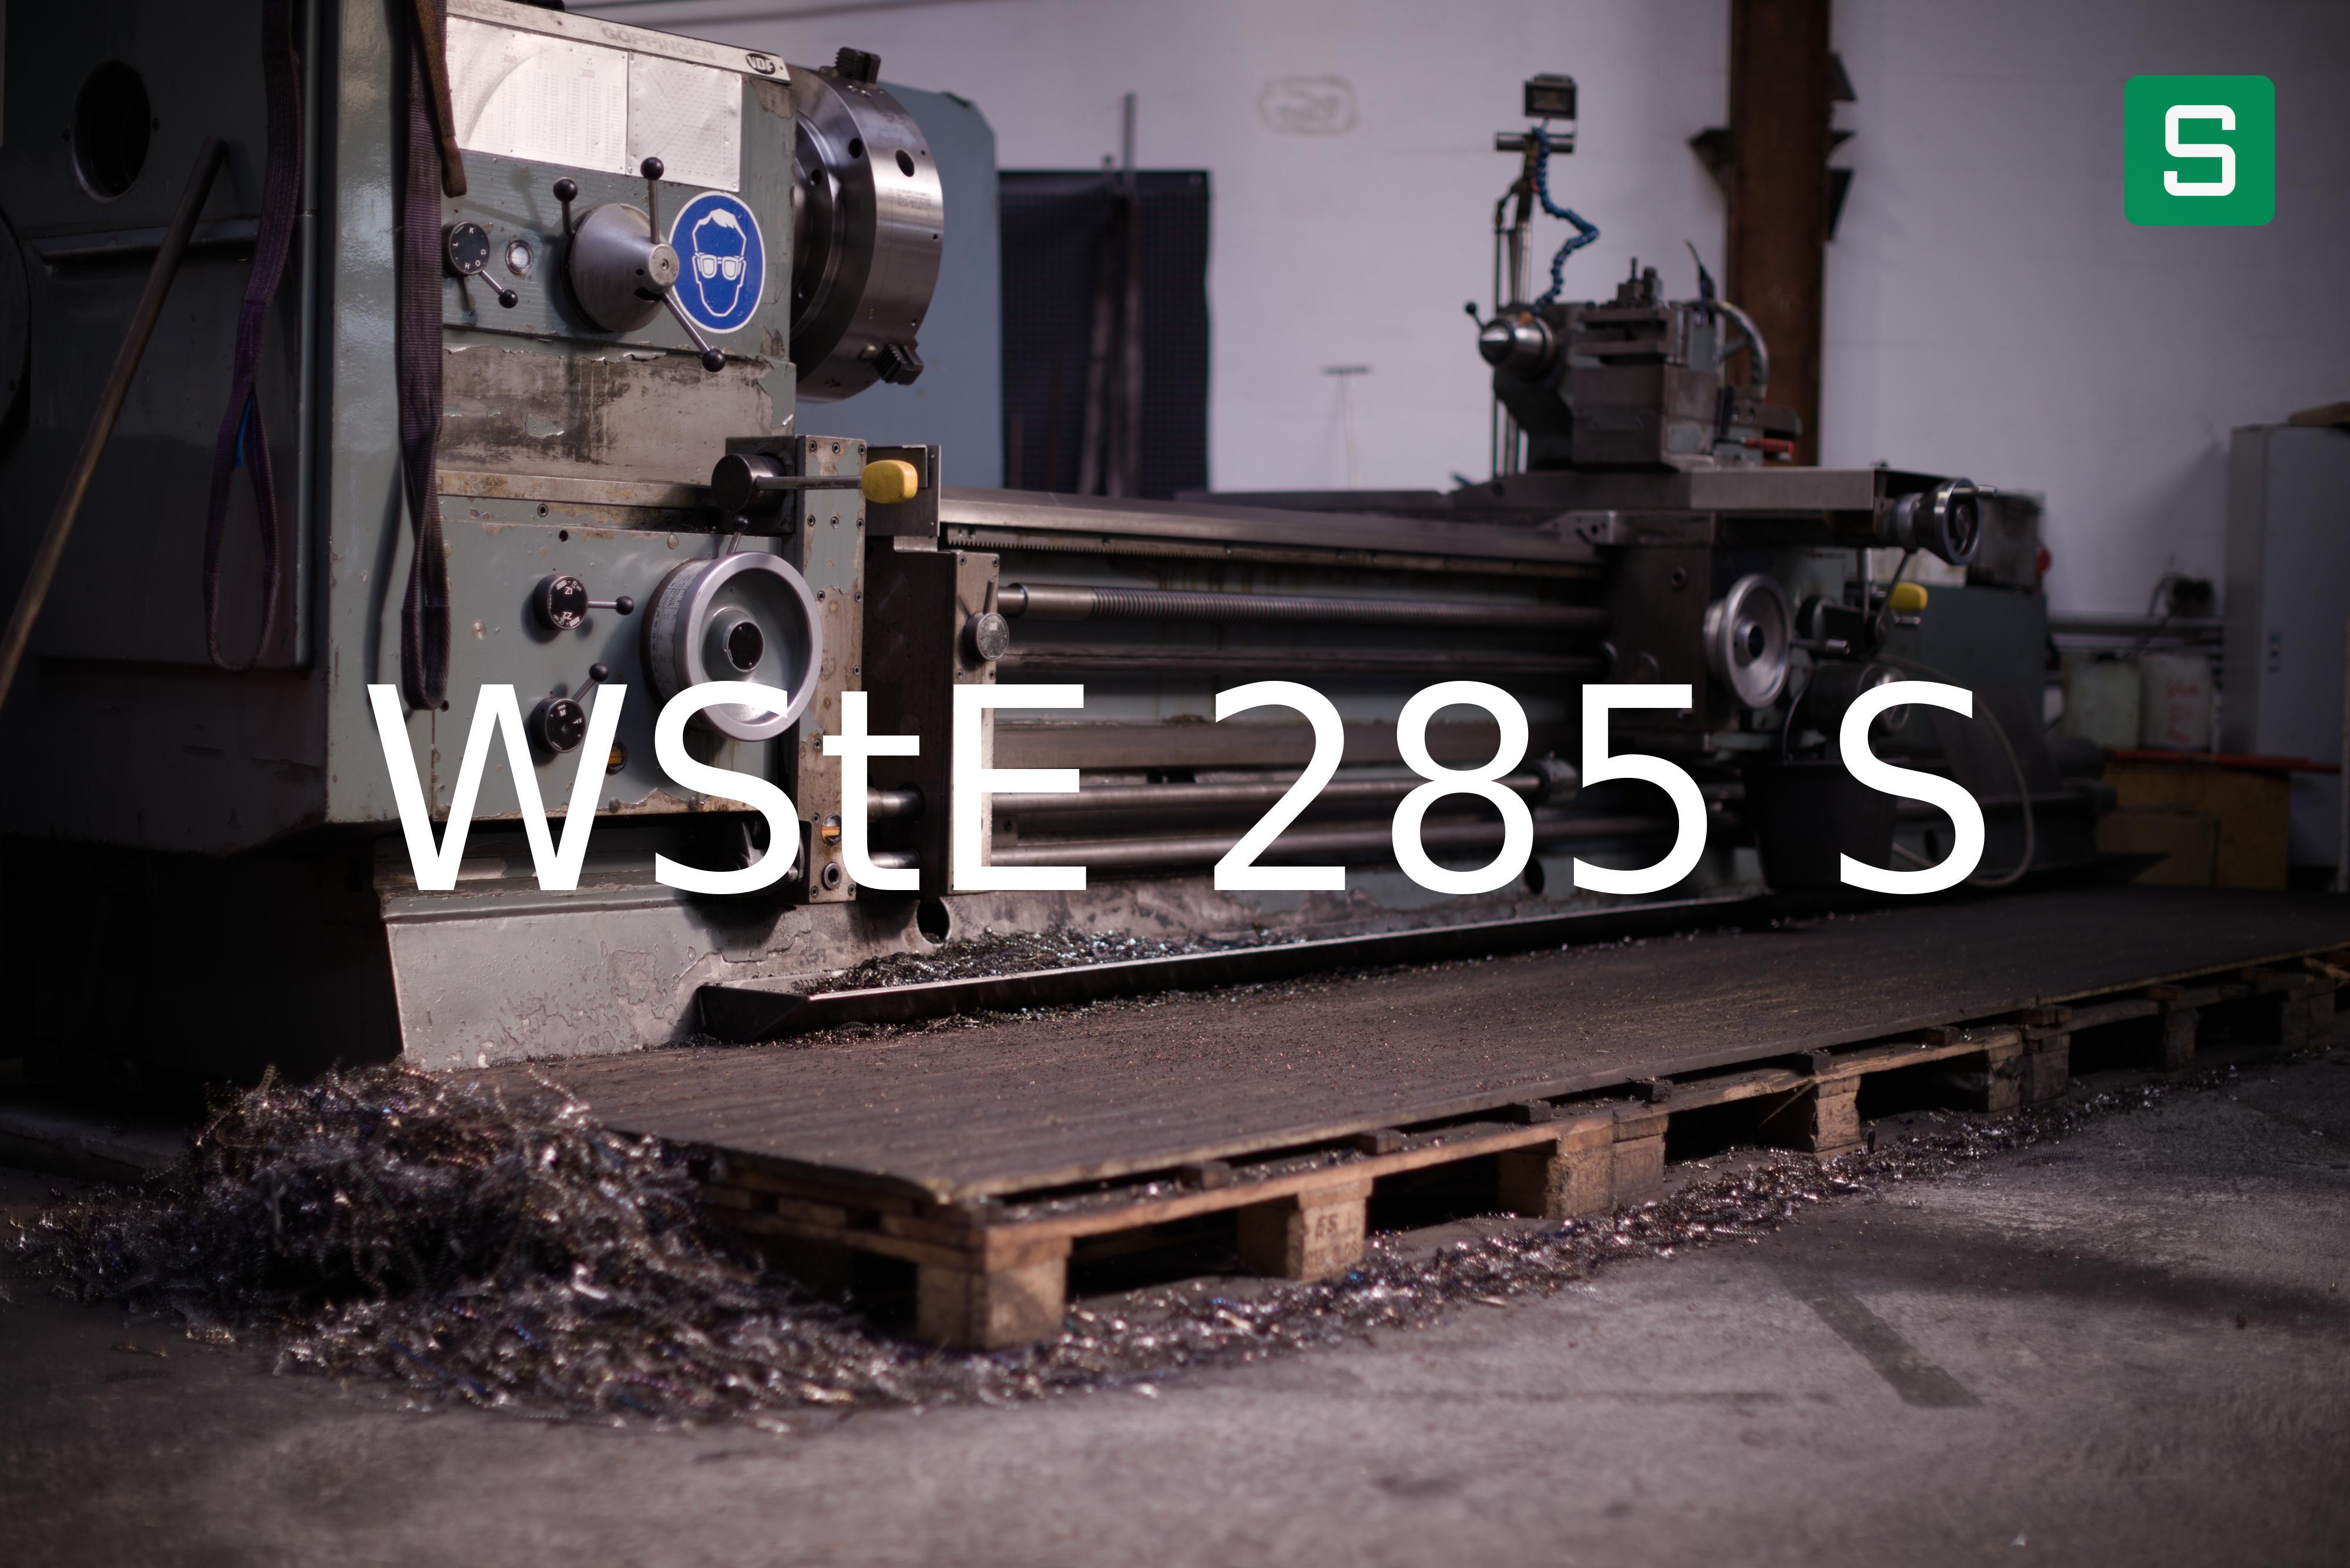 Steel Material: WStE 285 S